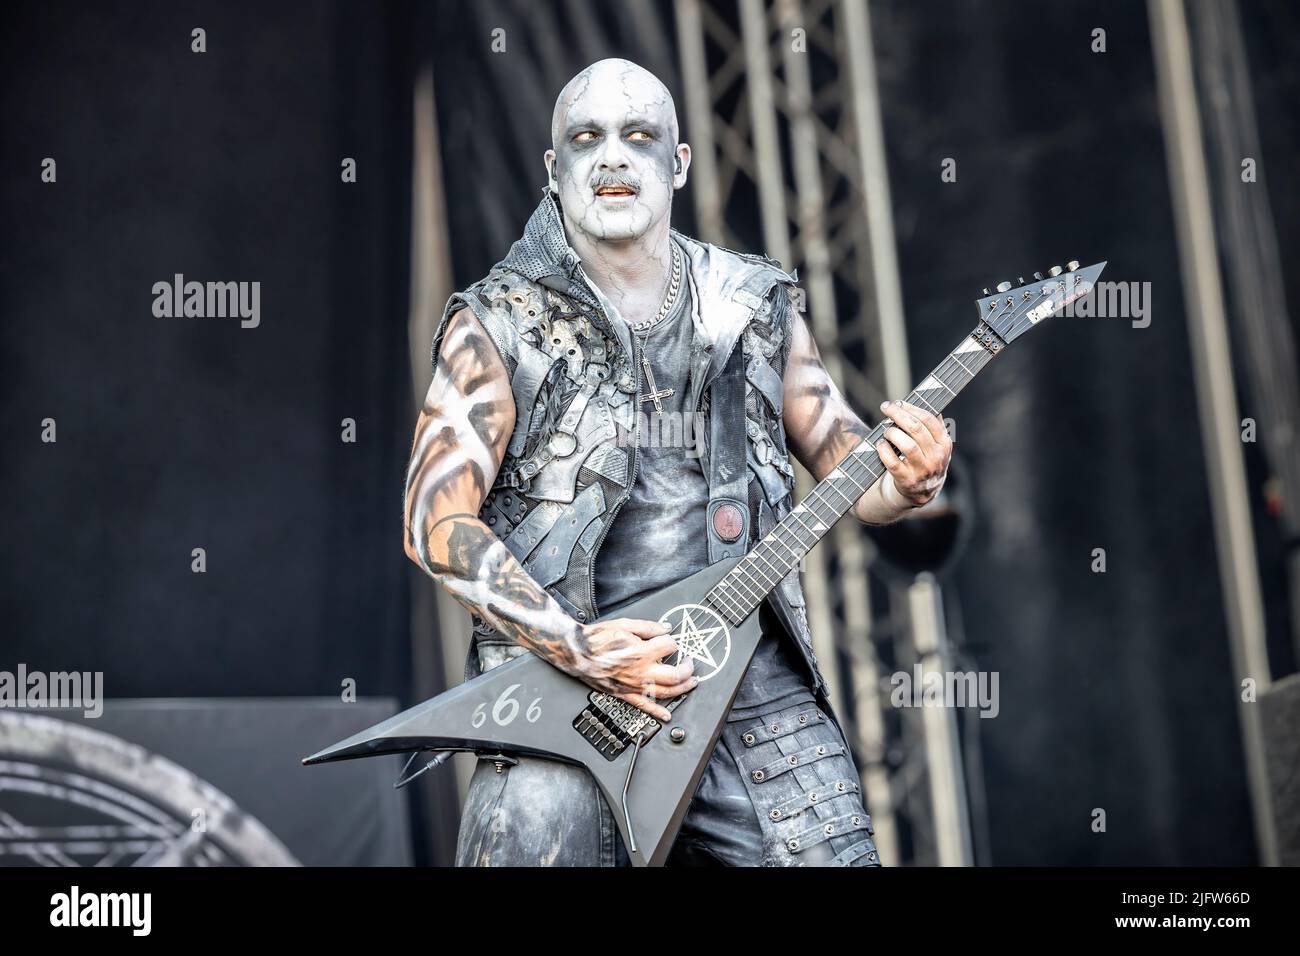 Shagrath of Dimmu Borgir performs on stage at the Tons of Rock News  Photo - Getty Images